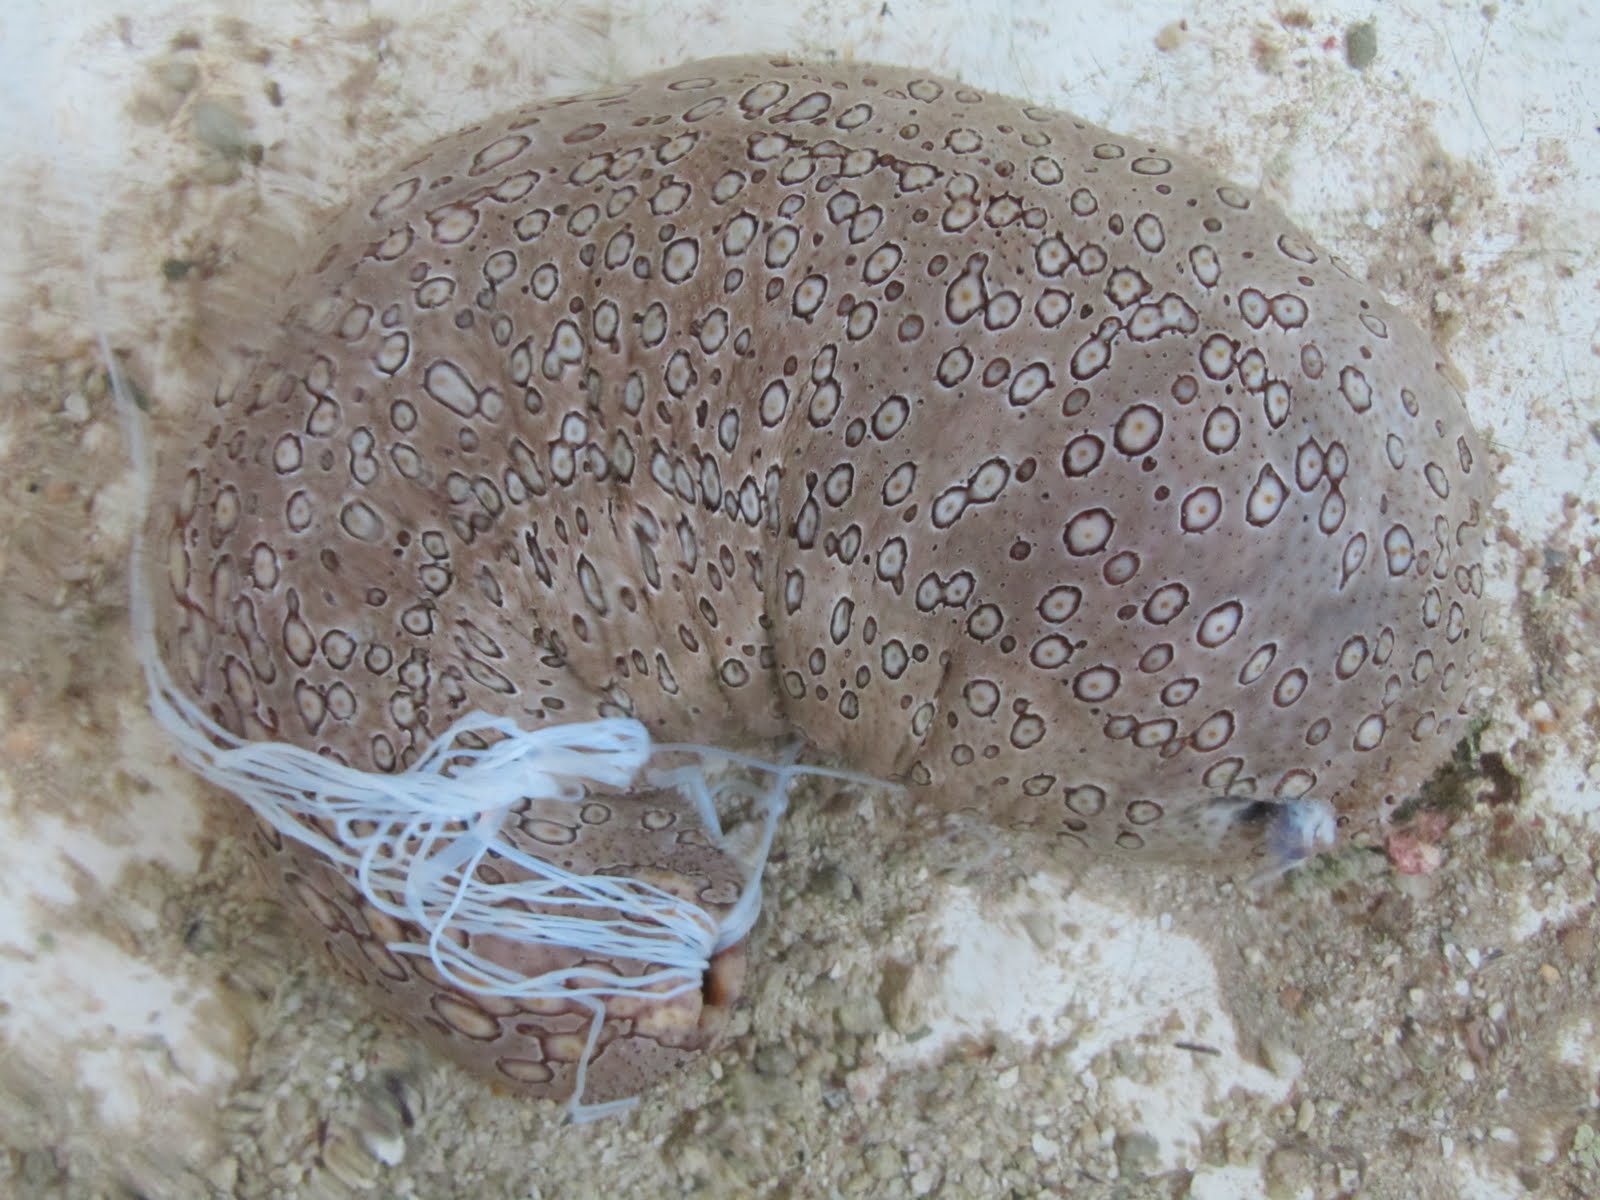 gray spotted sea cucumber releasing cuverian tubes